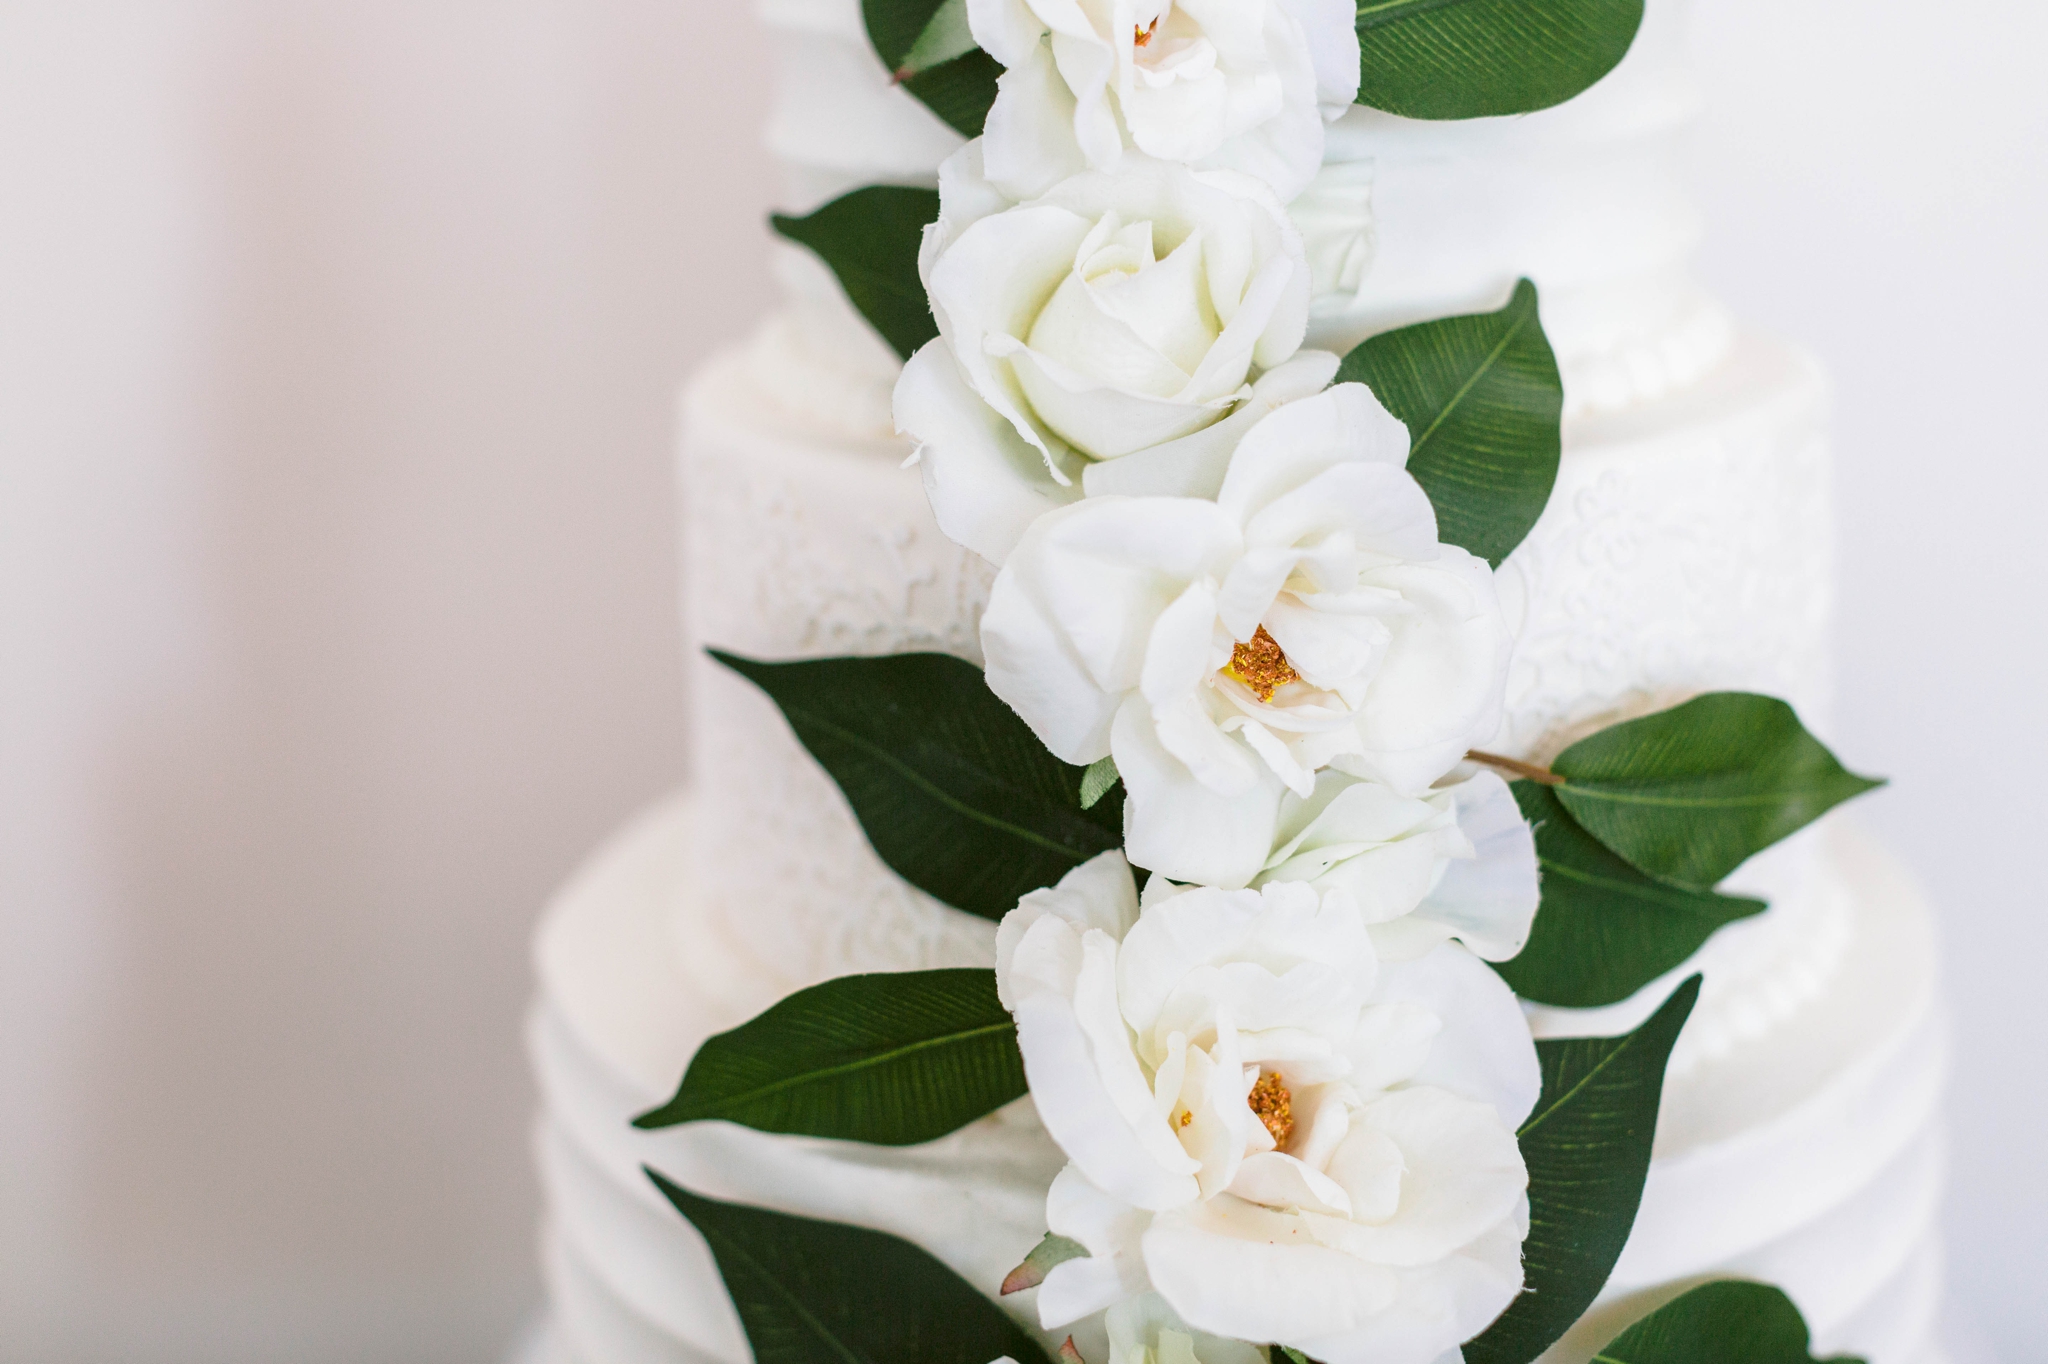  wedding cake table on an all white antique dresser with an all white cake decorated with greenery - luxury cake table inspiration - honolulu oahu hawaii wedding photographer - johanna dye photography 